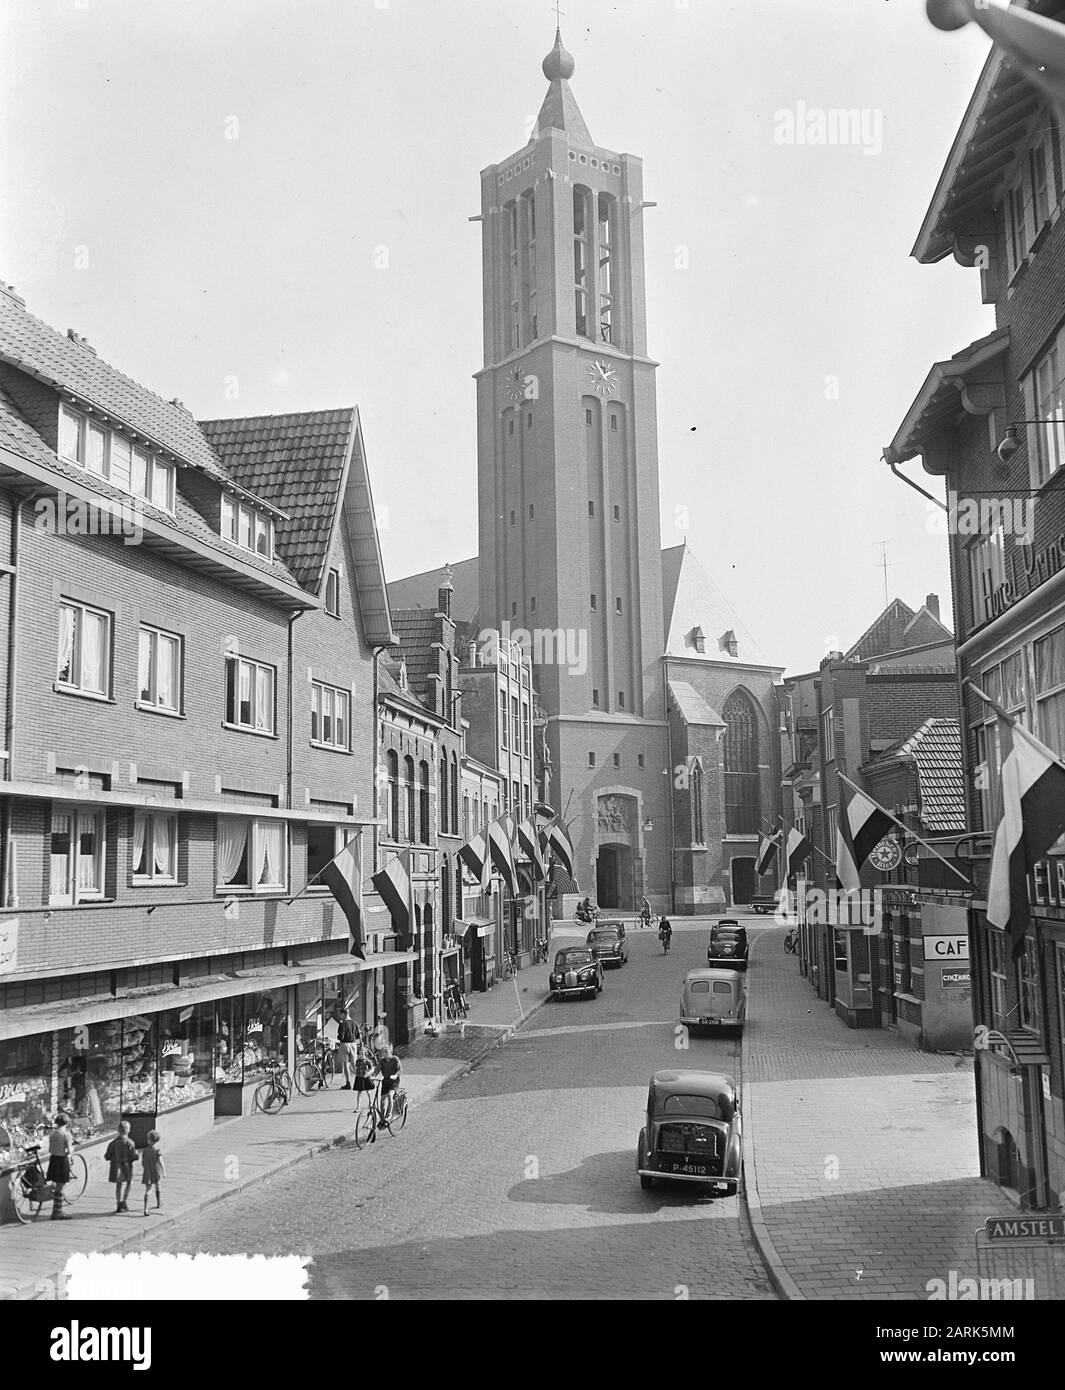 St. Martinus tower in Venlo Date: 3 October 1953 Location: Limburg, Venlo Keywords: churches, cityscapes, towers Personal name: St. Martinus tower Stock Photo